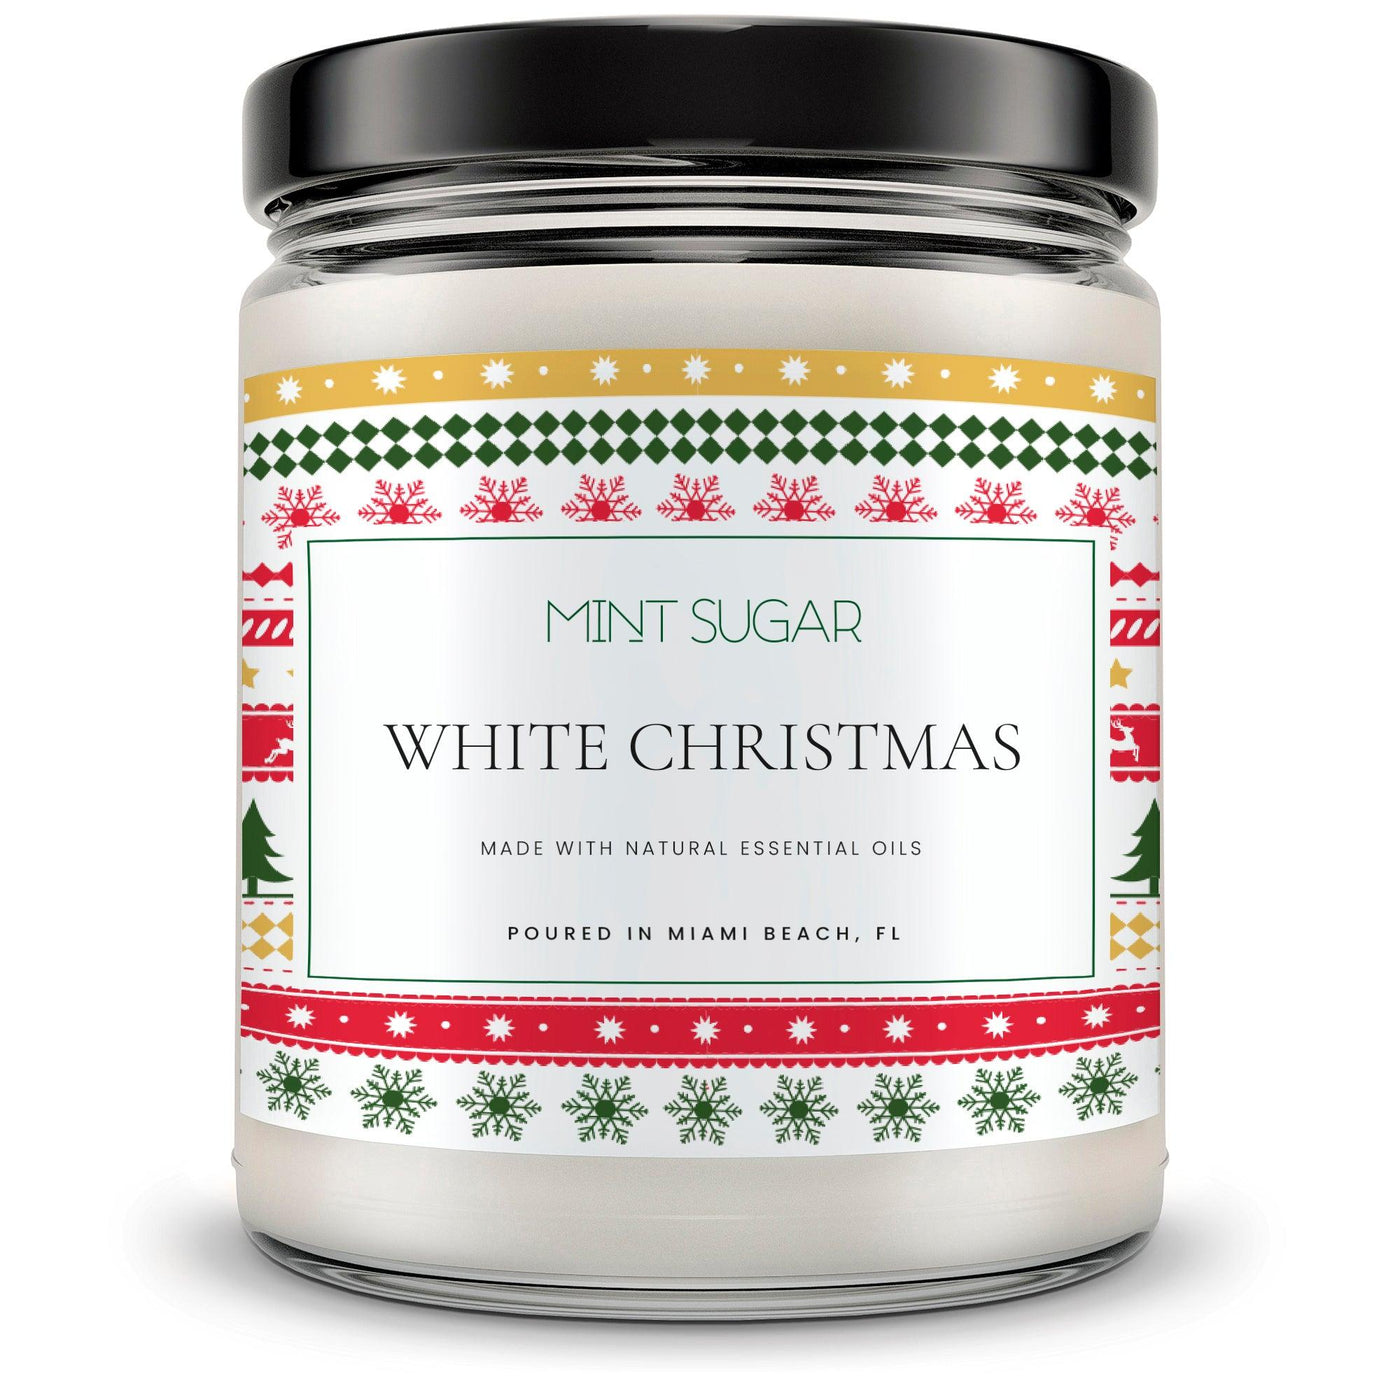 White Christmas - Mint Sugar Candle